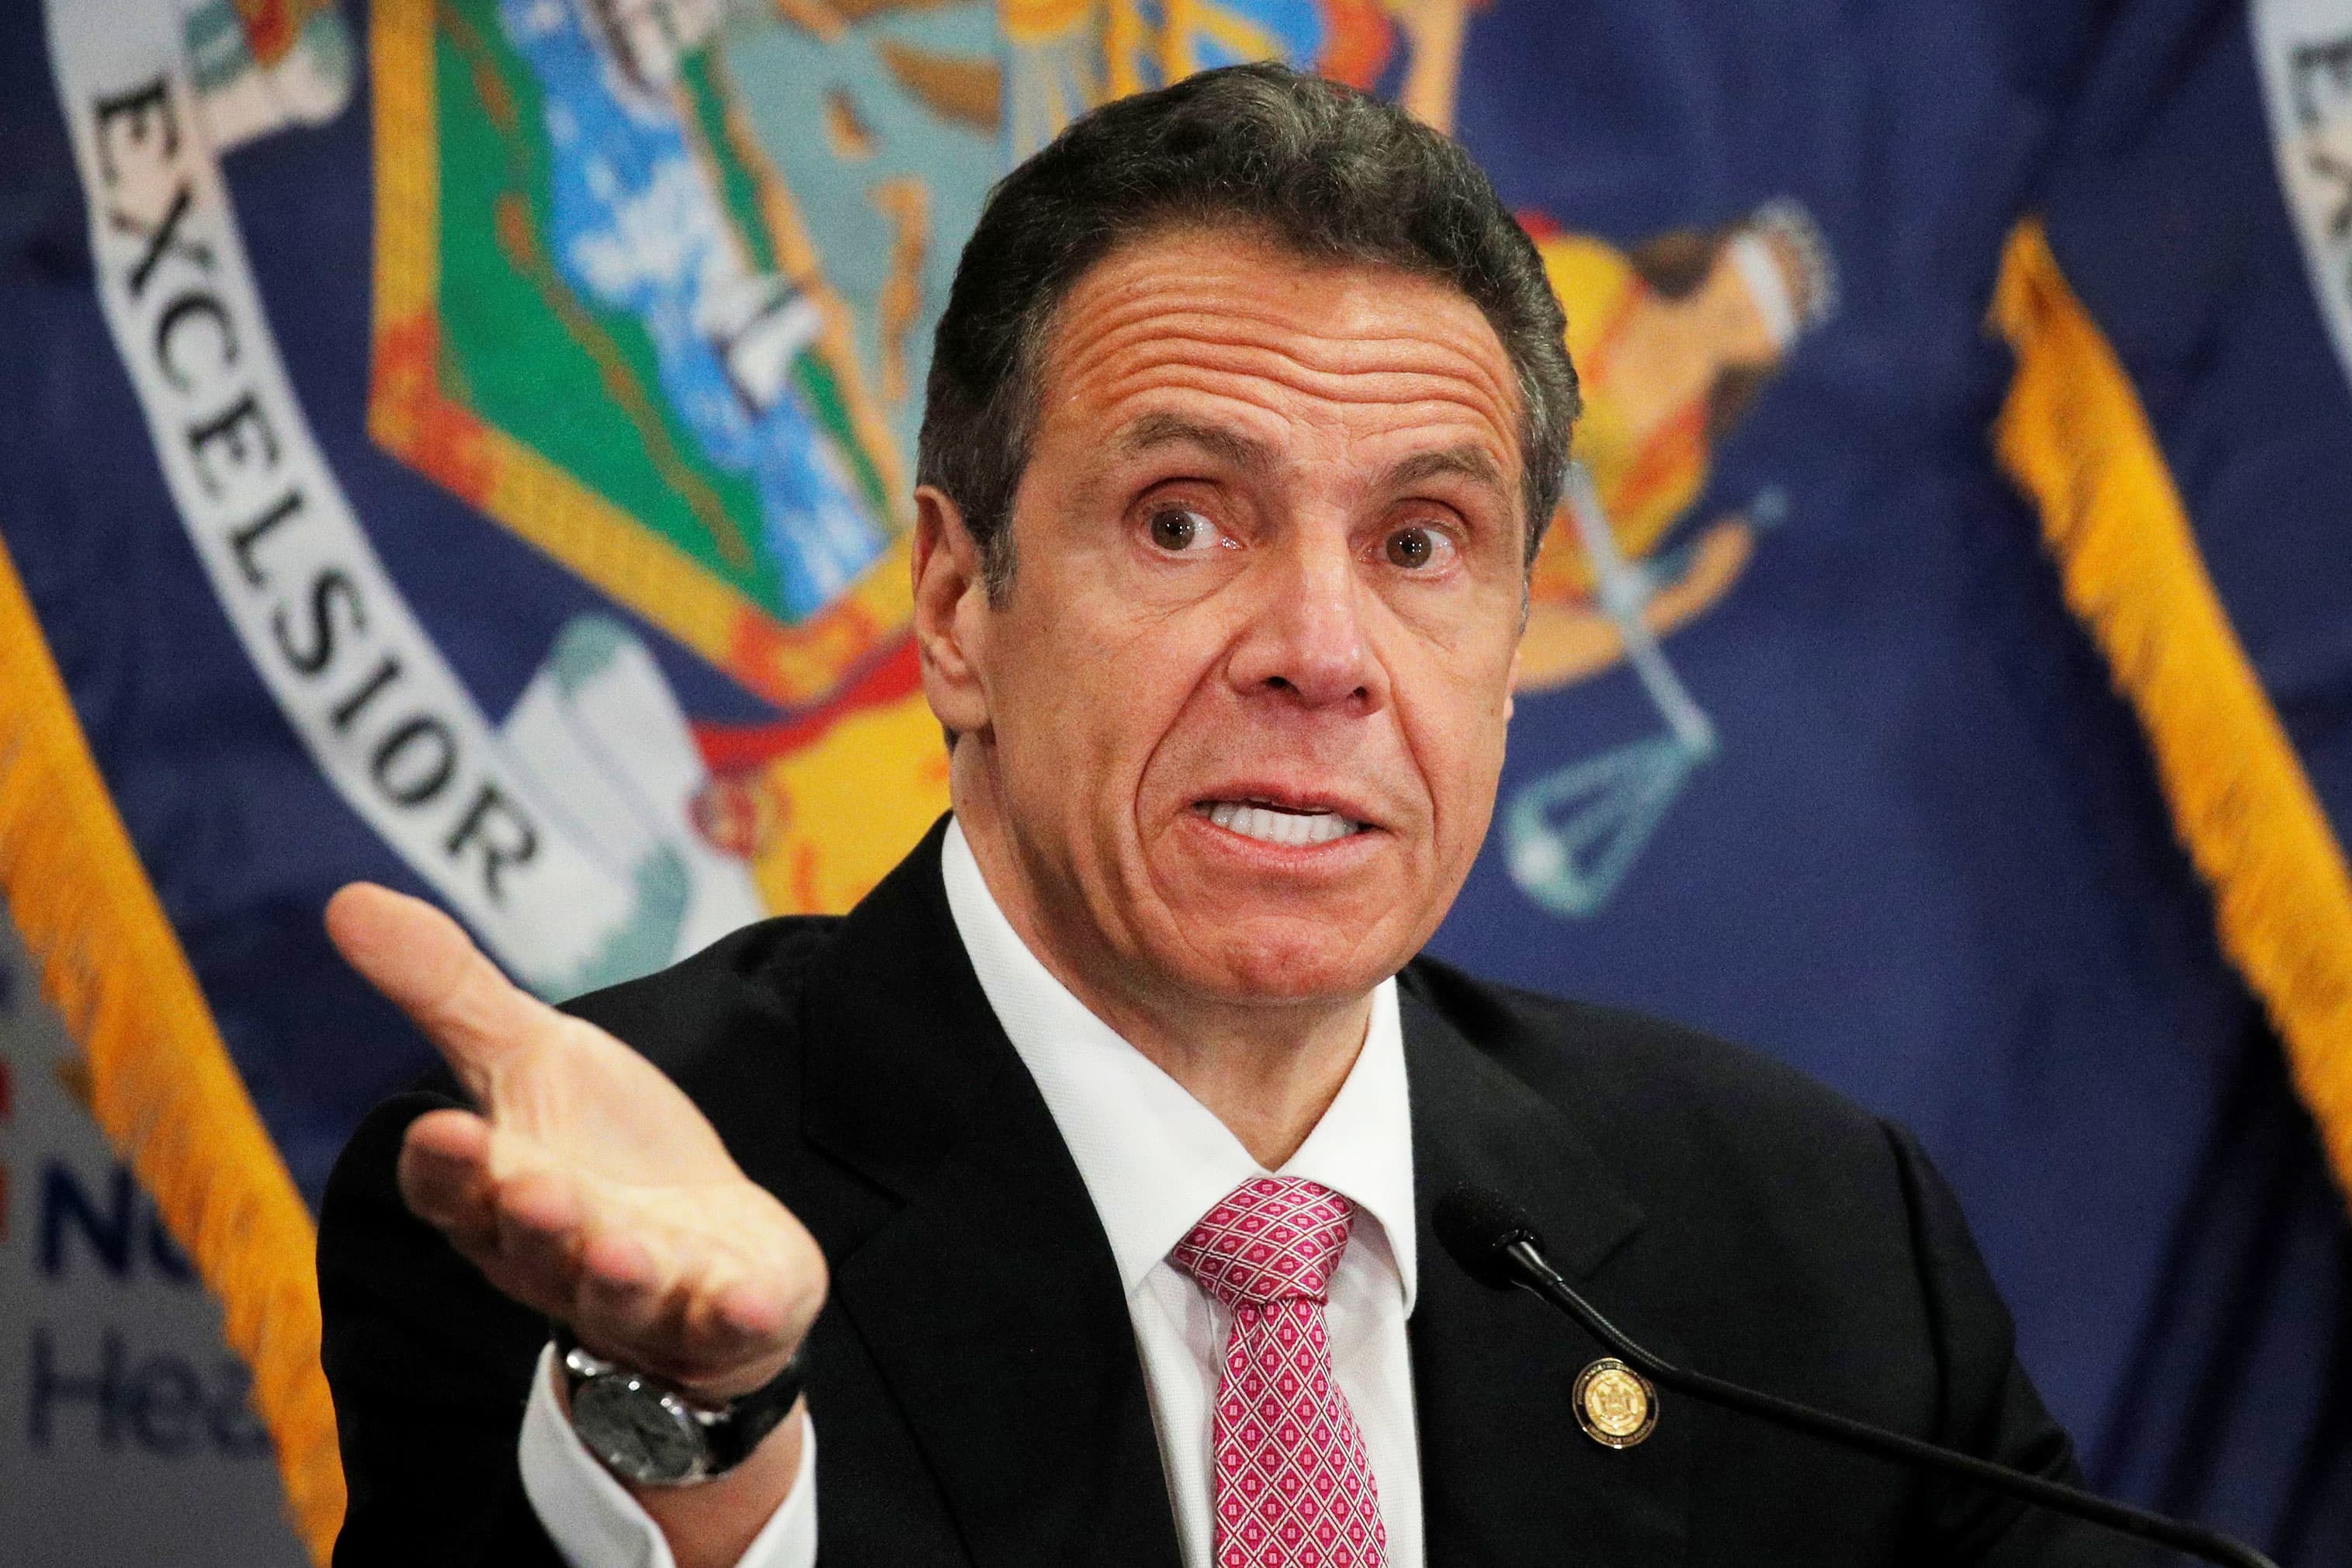 Former Cuomo staffer who accused governor of groping files criminal complaint